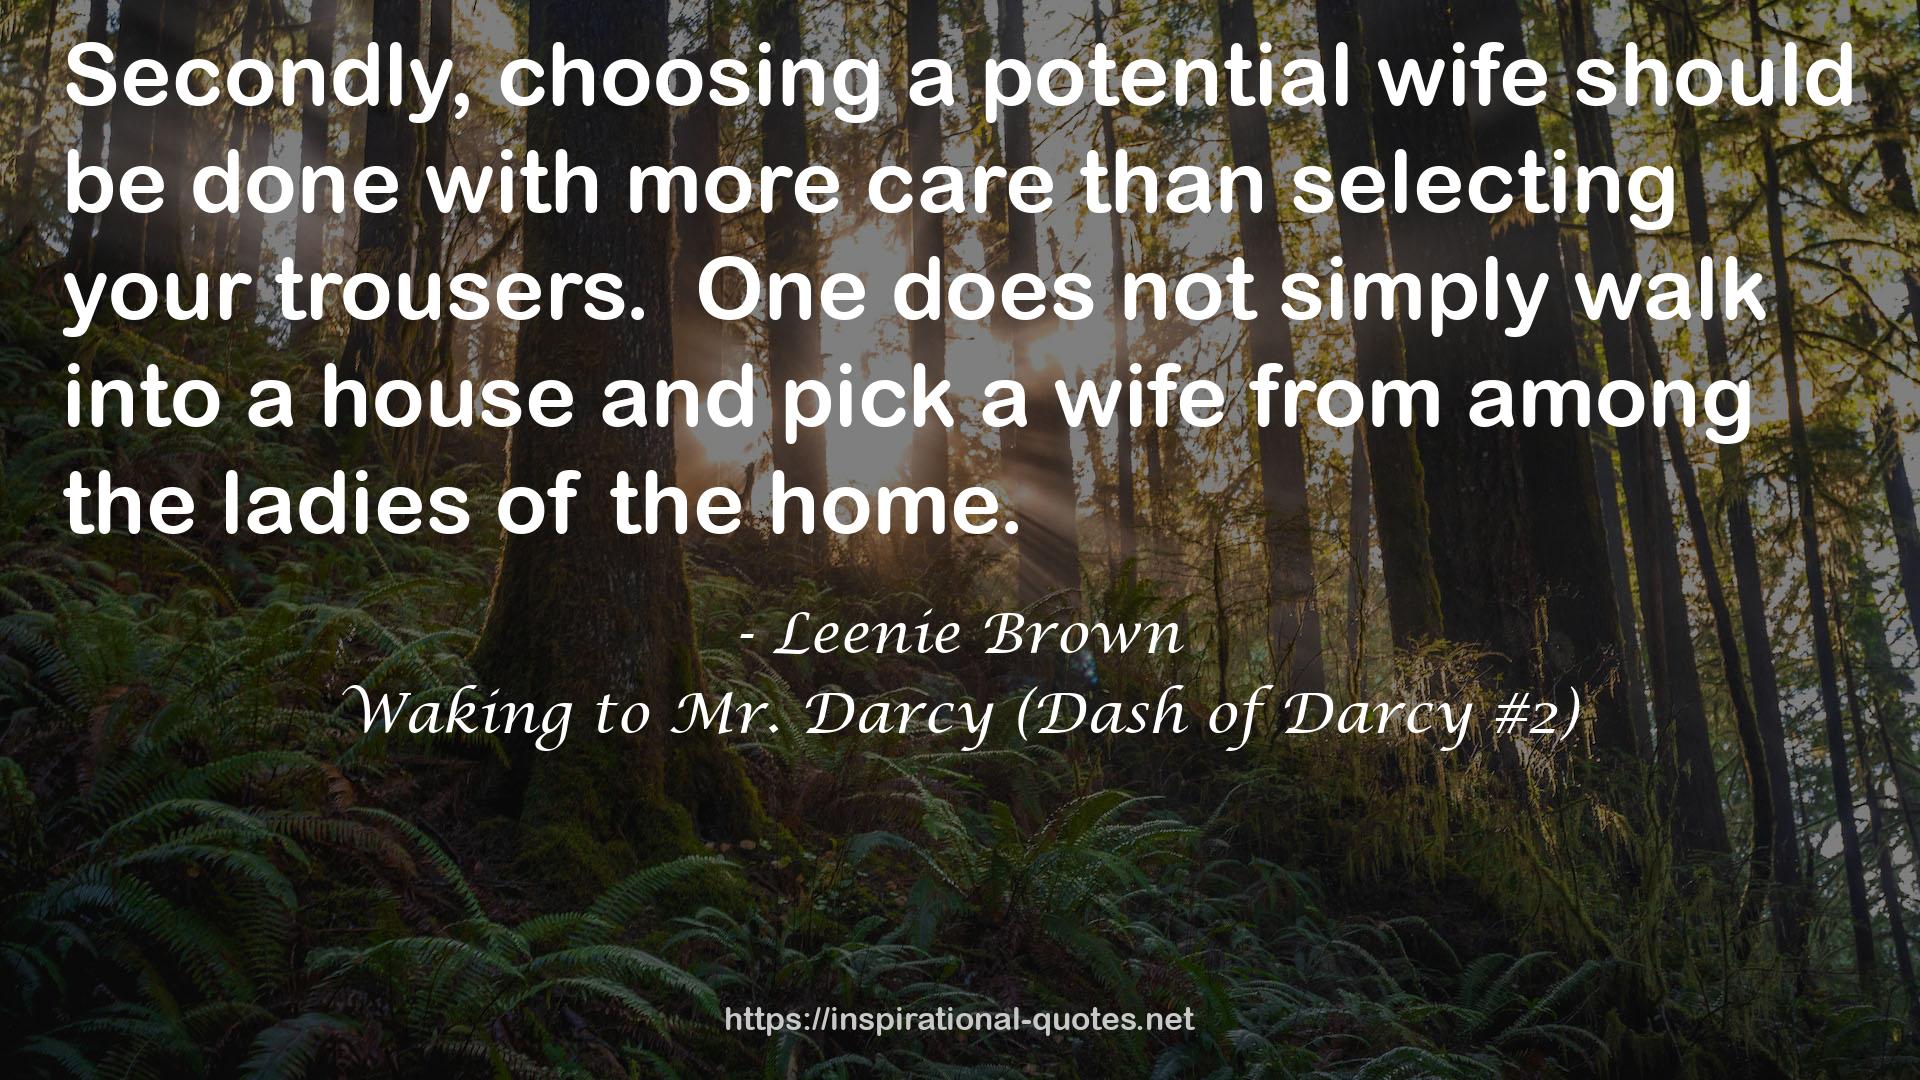 Waking to Mr. Darcy (Dash of Darcy #2) QUOTES